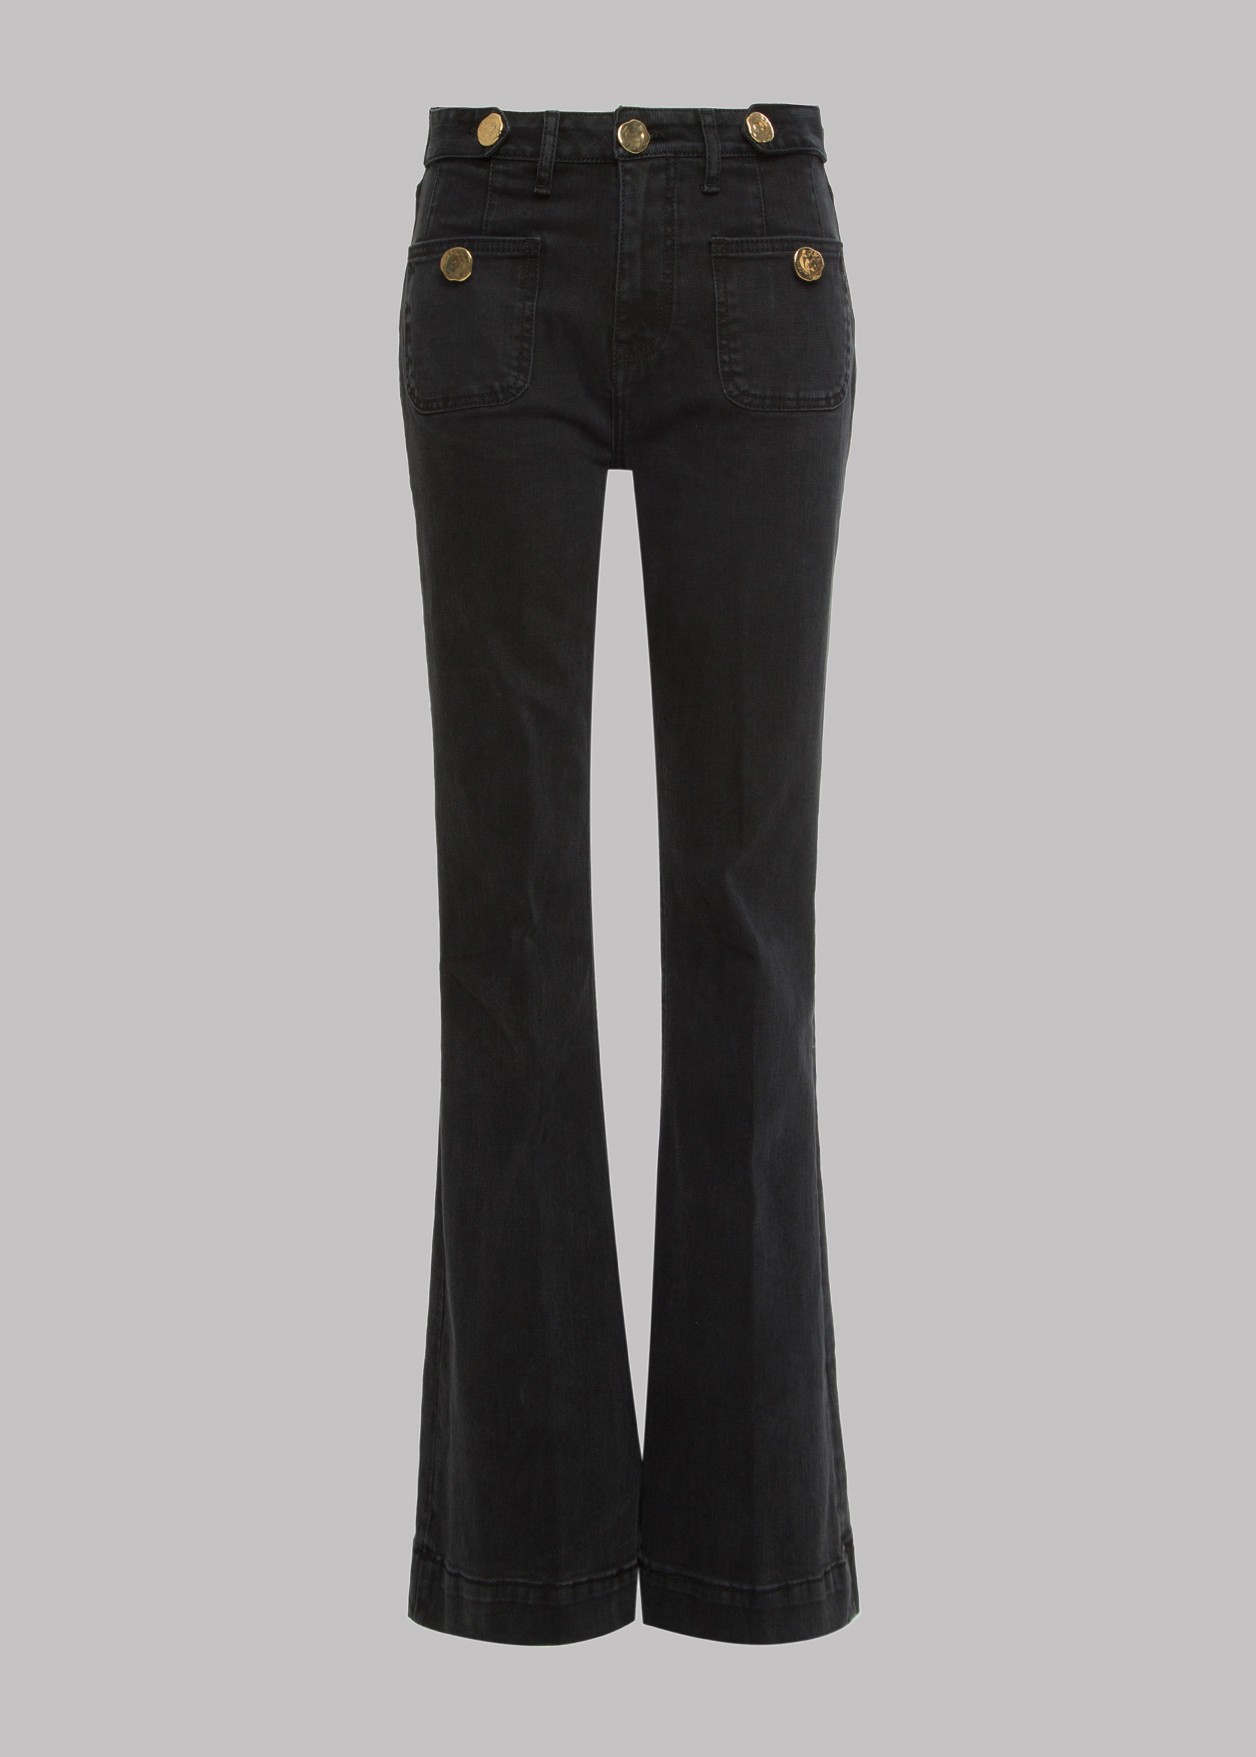 Flared jeans qith gold buttons